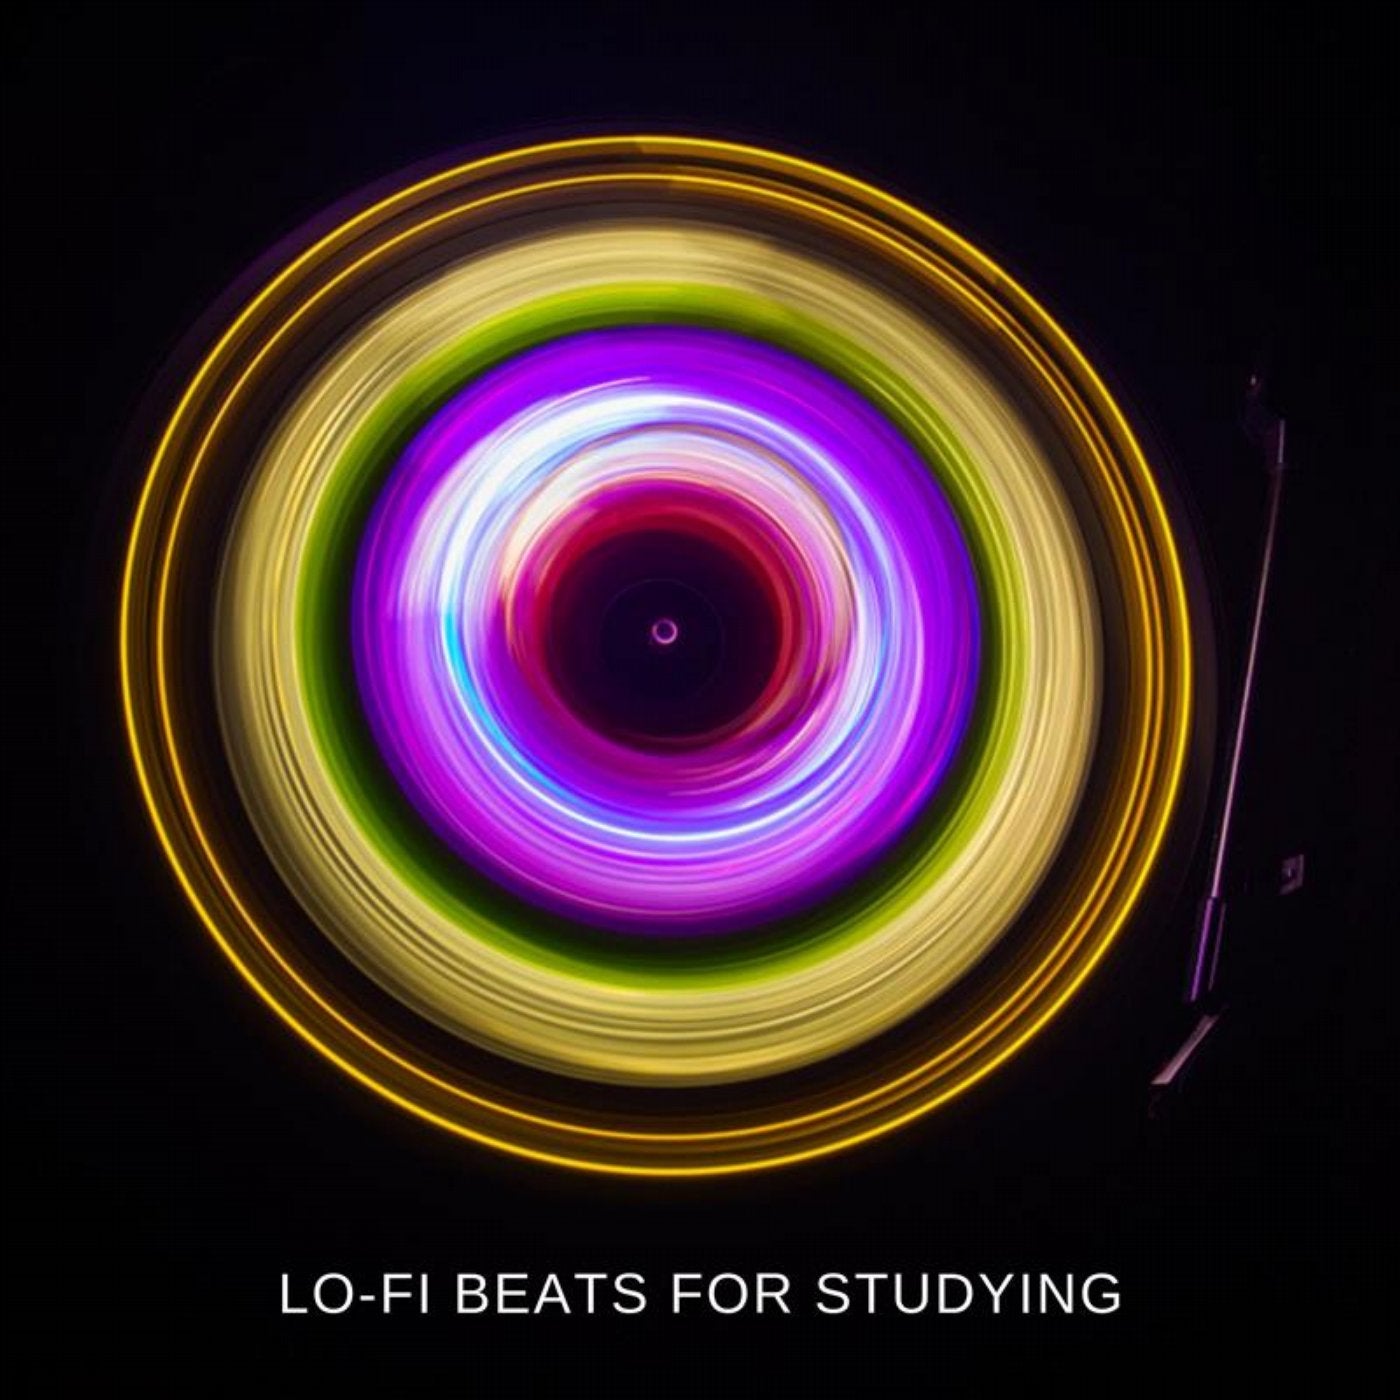 Lo-Fi Beats for Studying